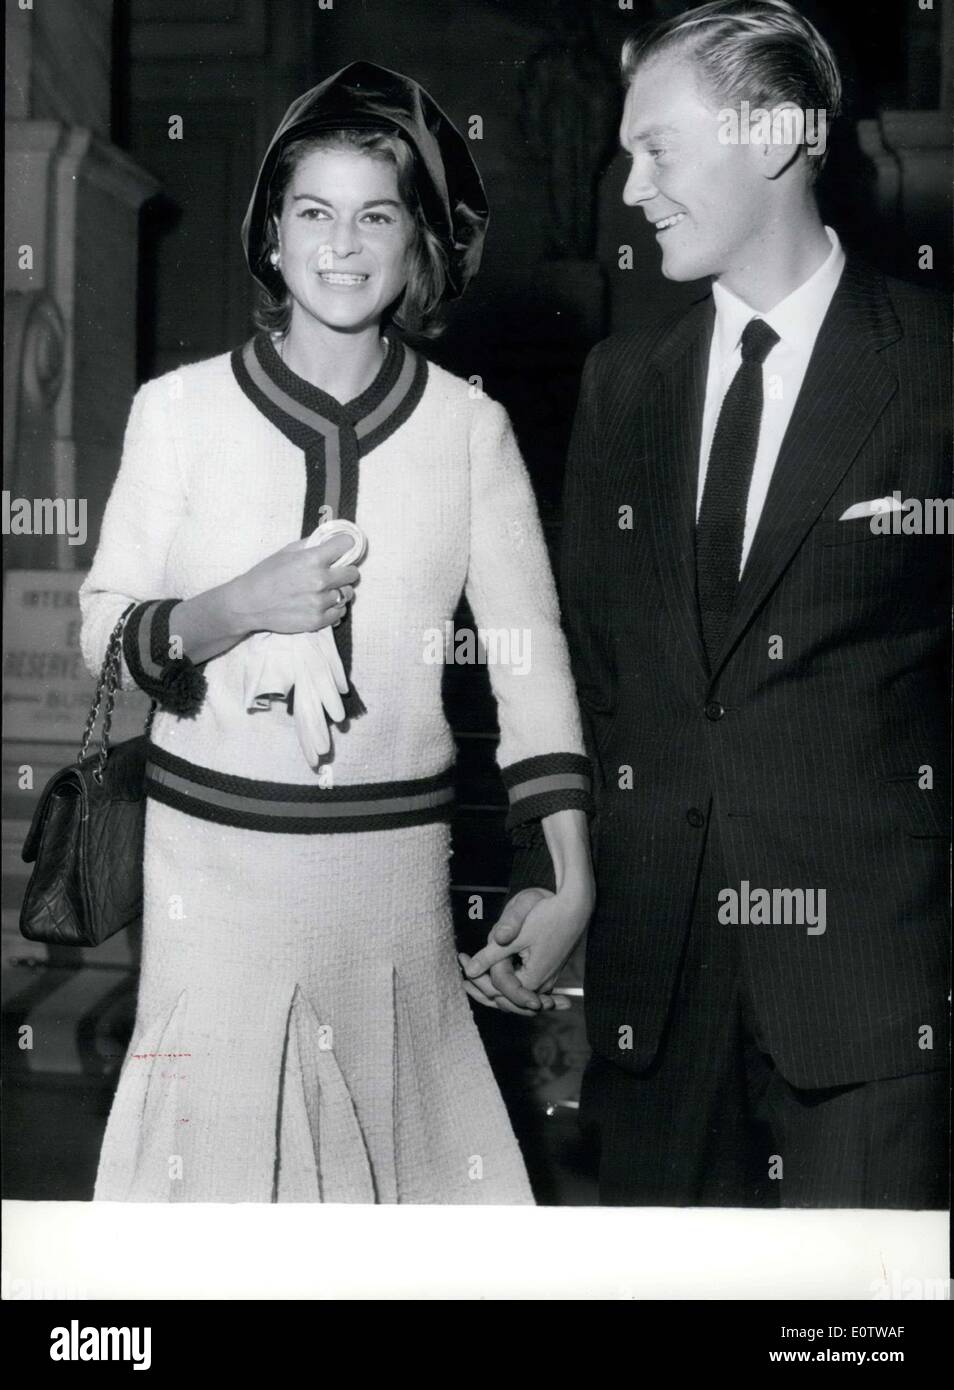 Oct. 02, 1960 - The 25-year-old Count of Suffolk, who is a friend of the Duke of Kent and of Princess Alexandre, married Miss Suzanne Litman, the daughter of an important French manufacturer, in Neuilly. Here is a picture of the newlyweds leaving the town hall. Stock Photo